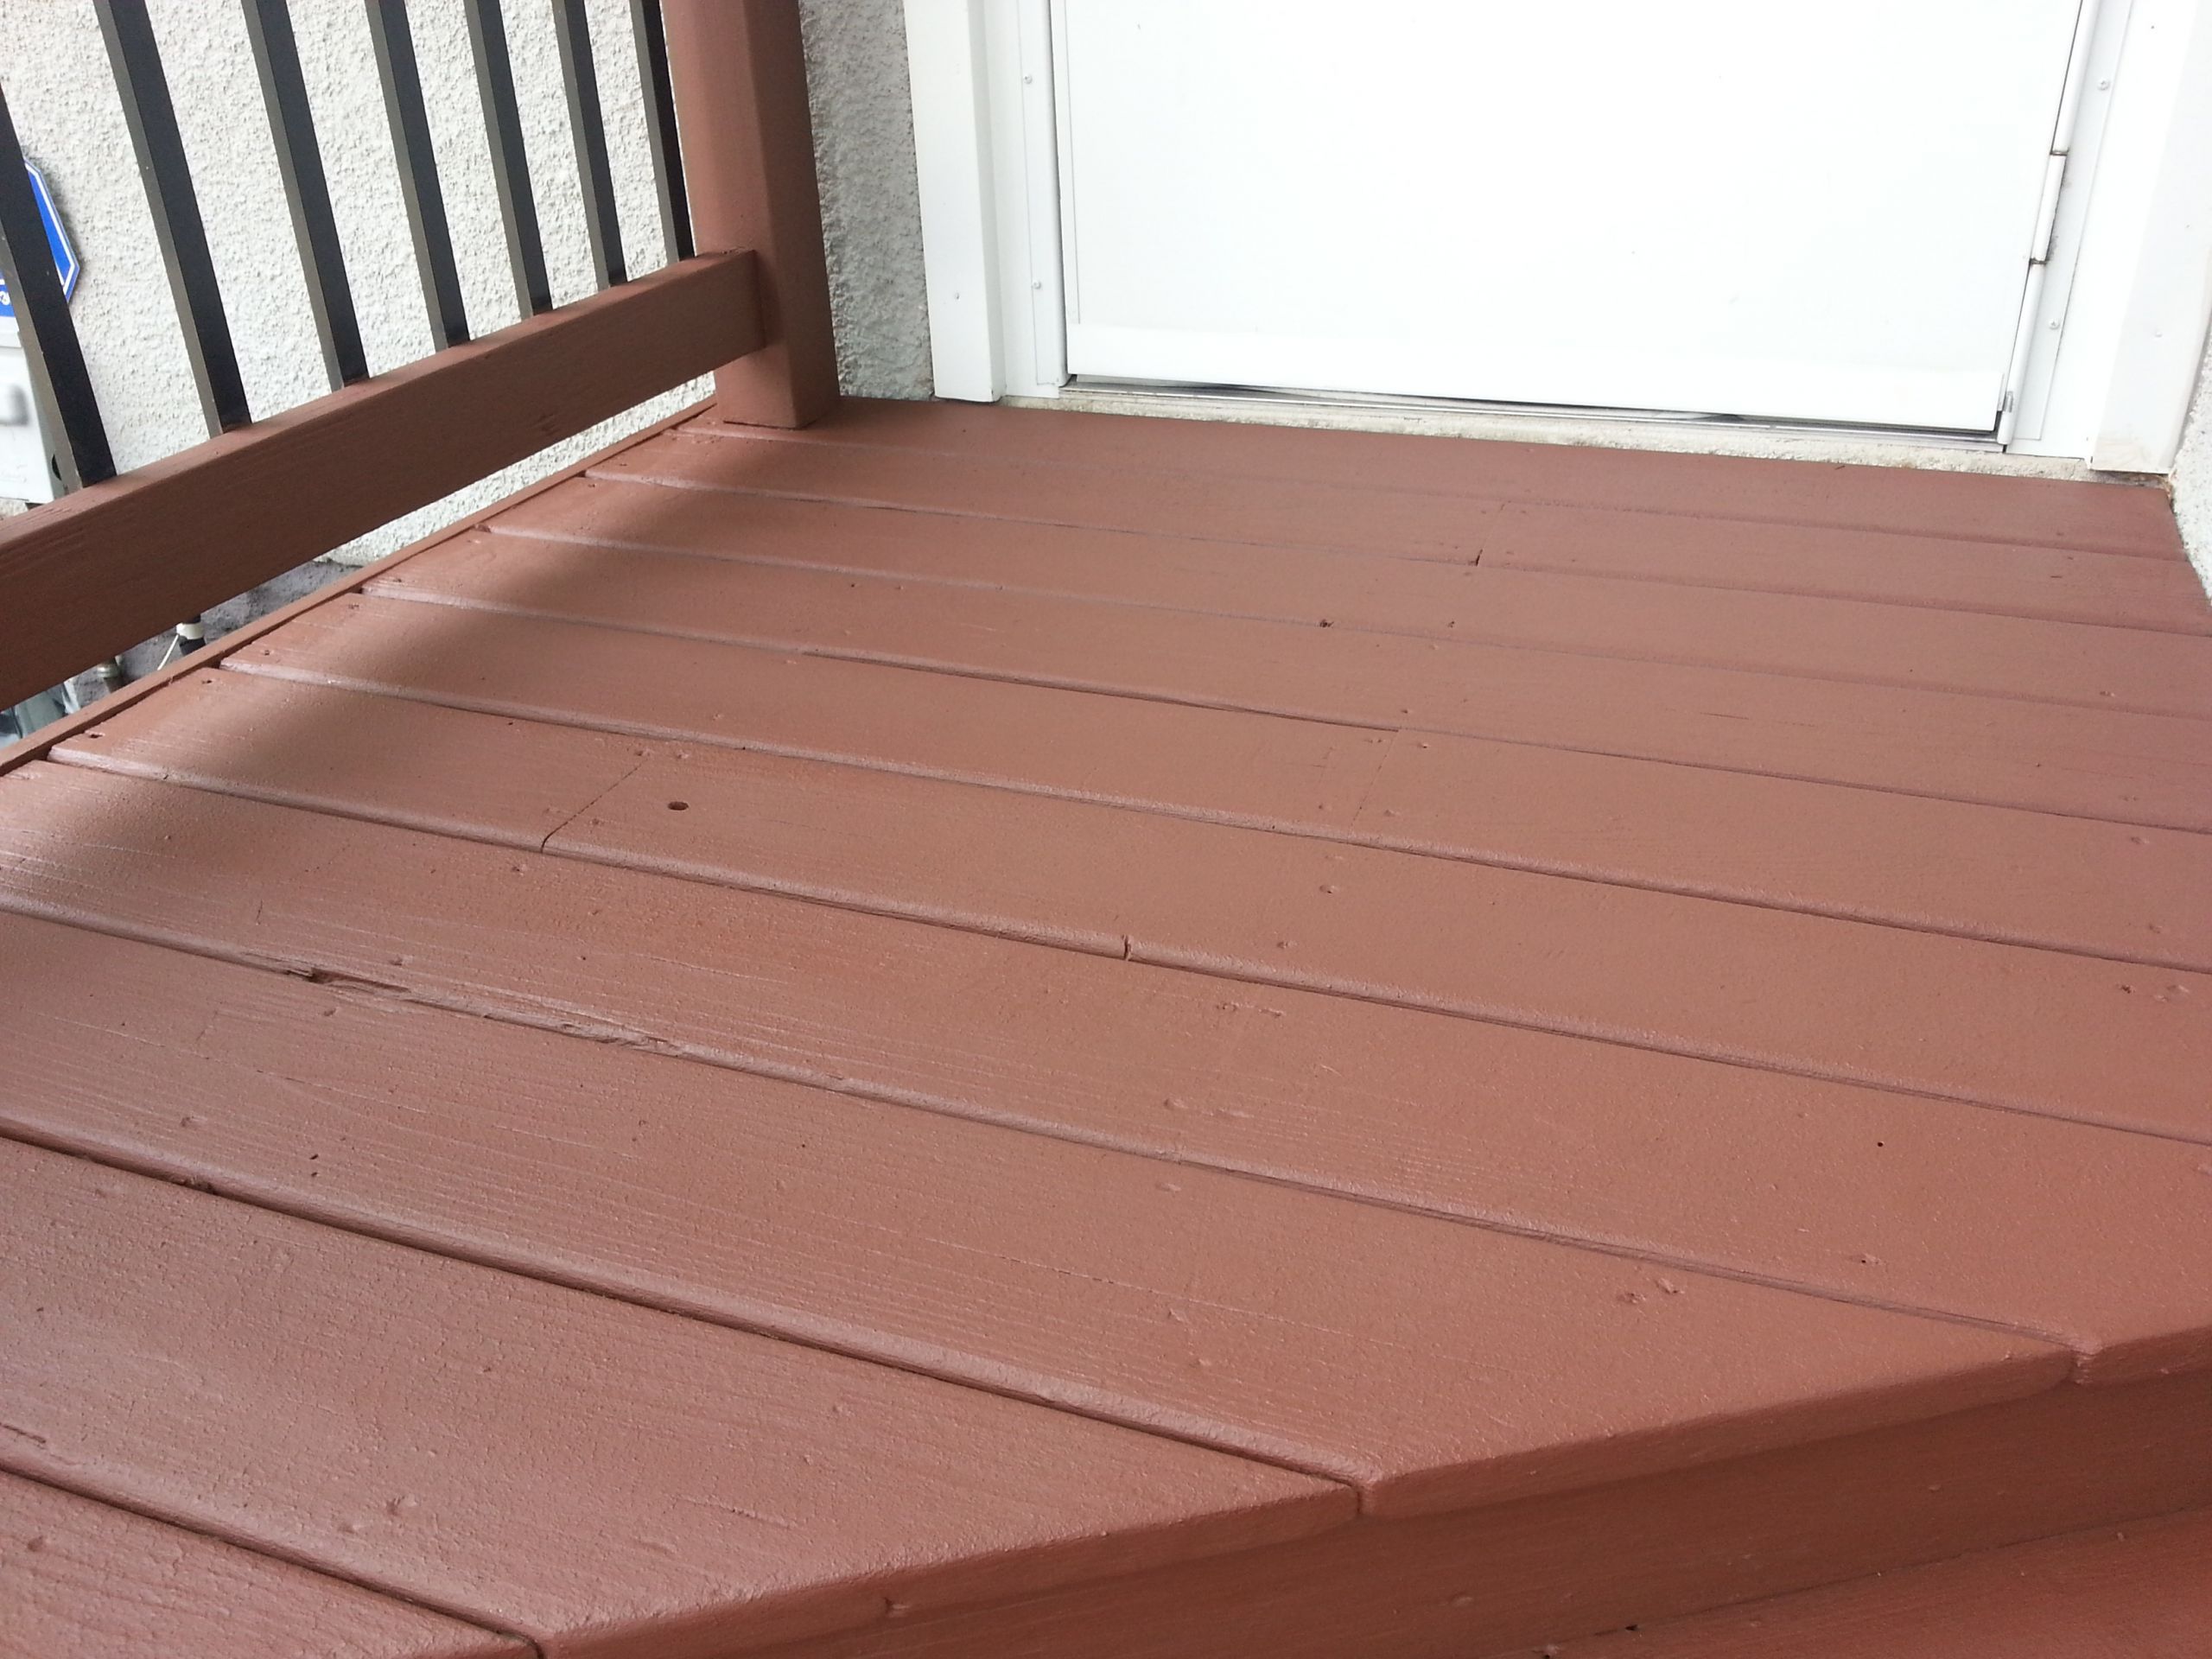 Lowes Deck Paint
 Decks Cabot Stain Lowes For Best Floor Deck Painting